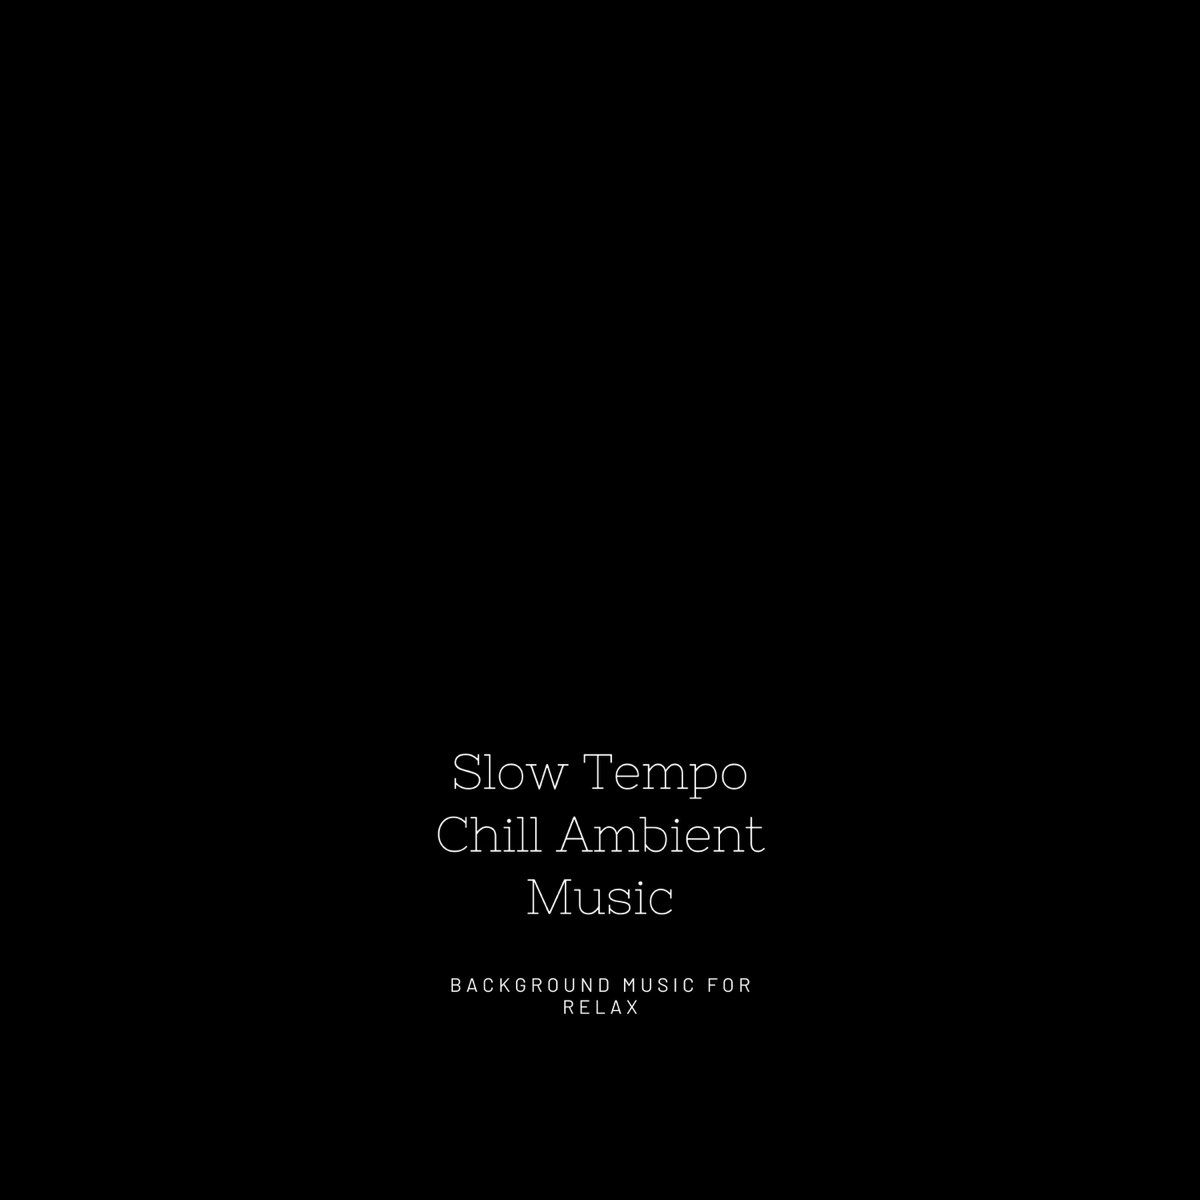 Slow Tempo Chill Ambient Music by Background Music for Relax on Apple Music